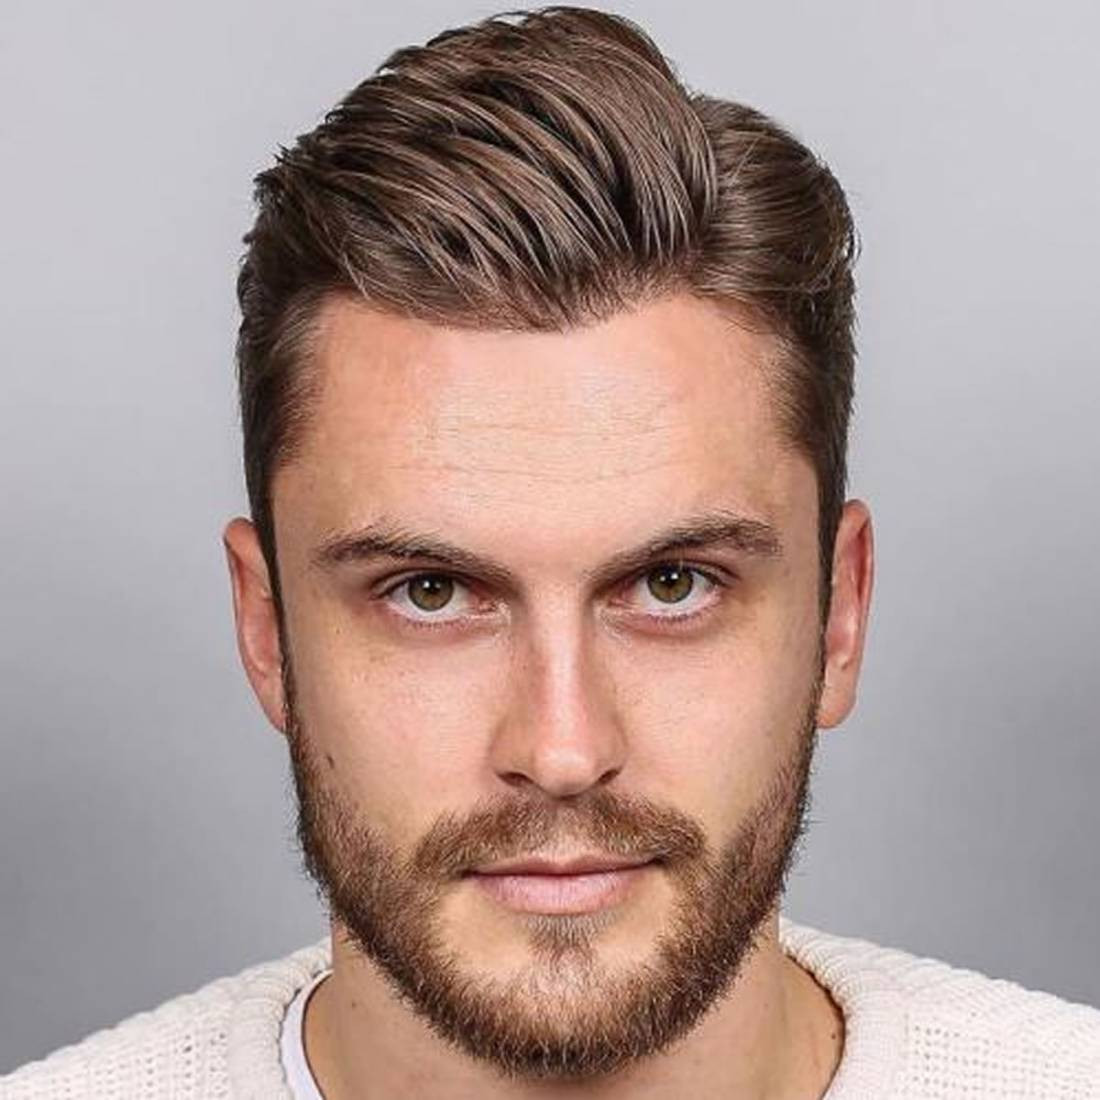 Male Short Haircuts
 45 Smart & Stylish Short Hairstyles For Men